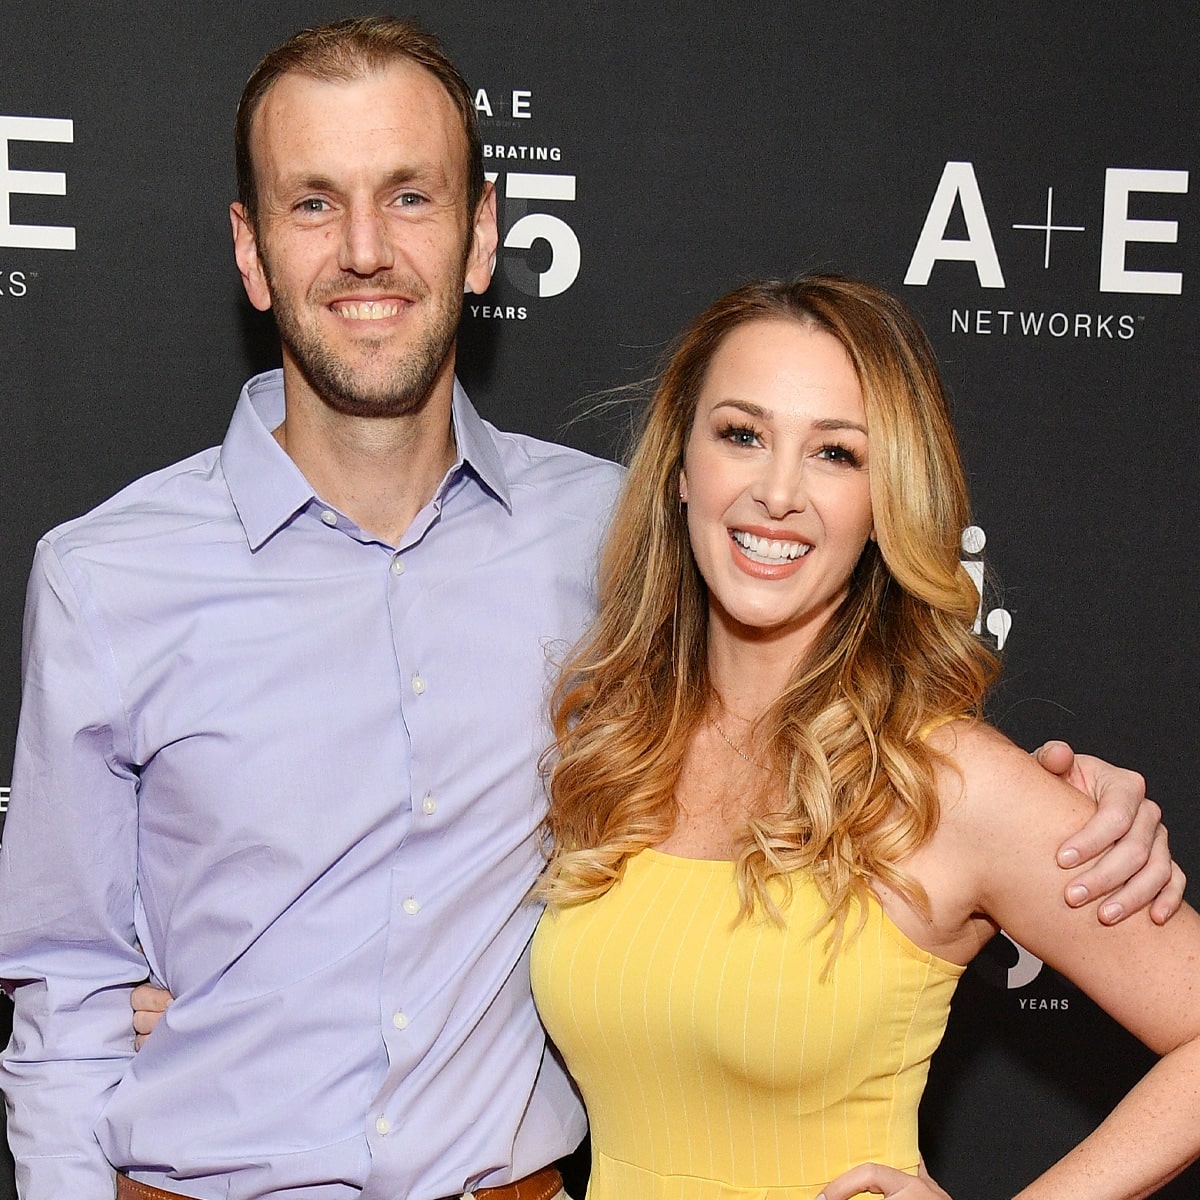 Dough Hehner with his wife Jamie Otis in a frame.